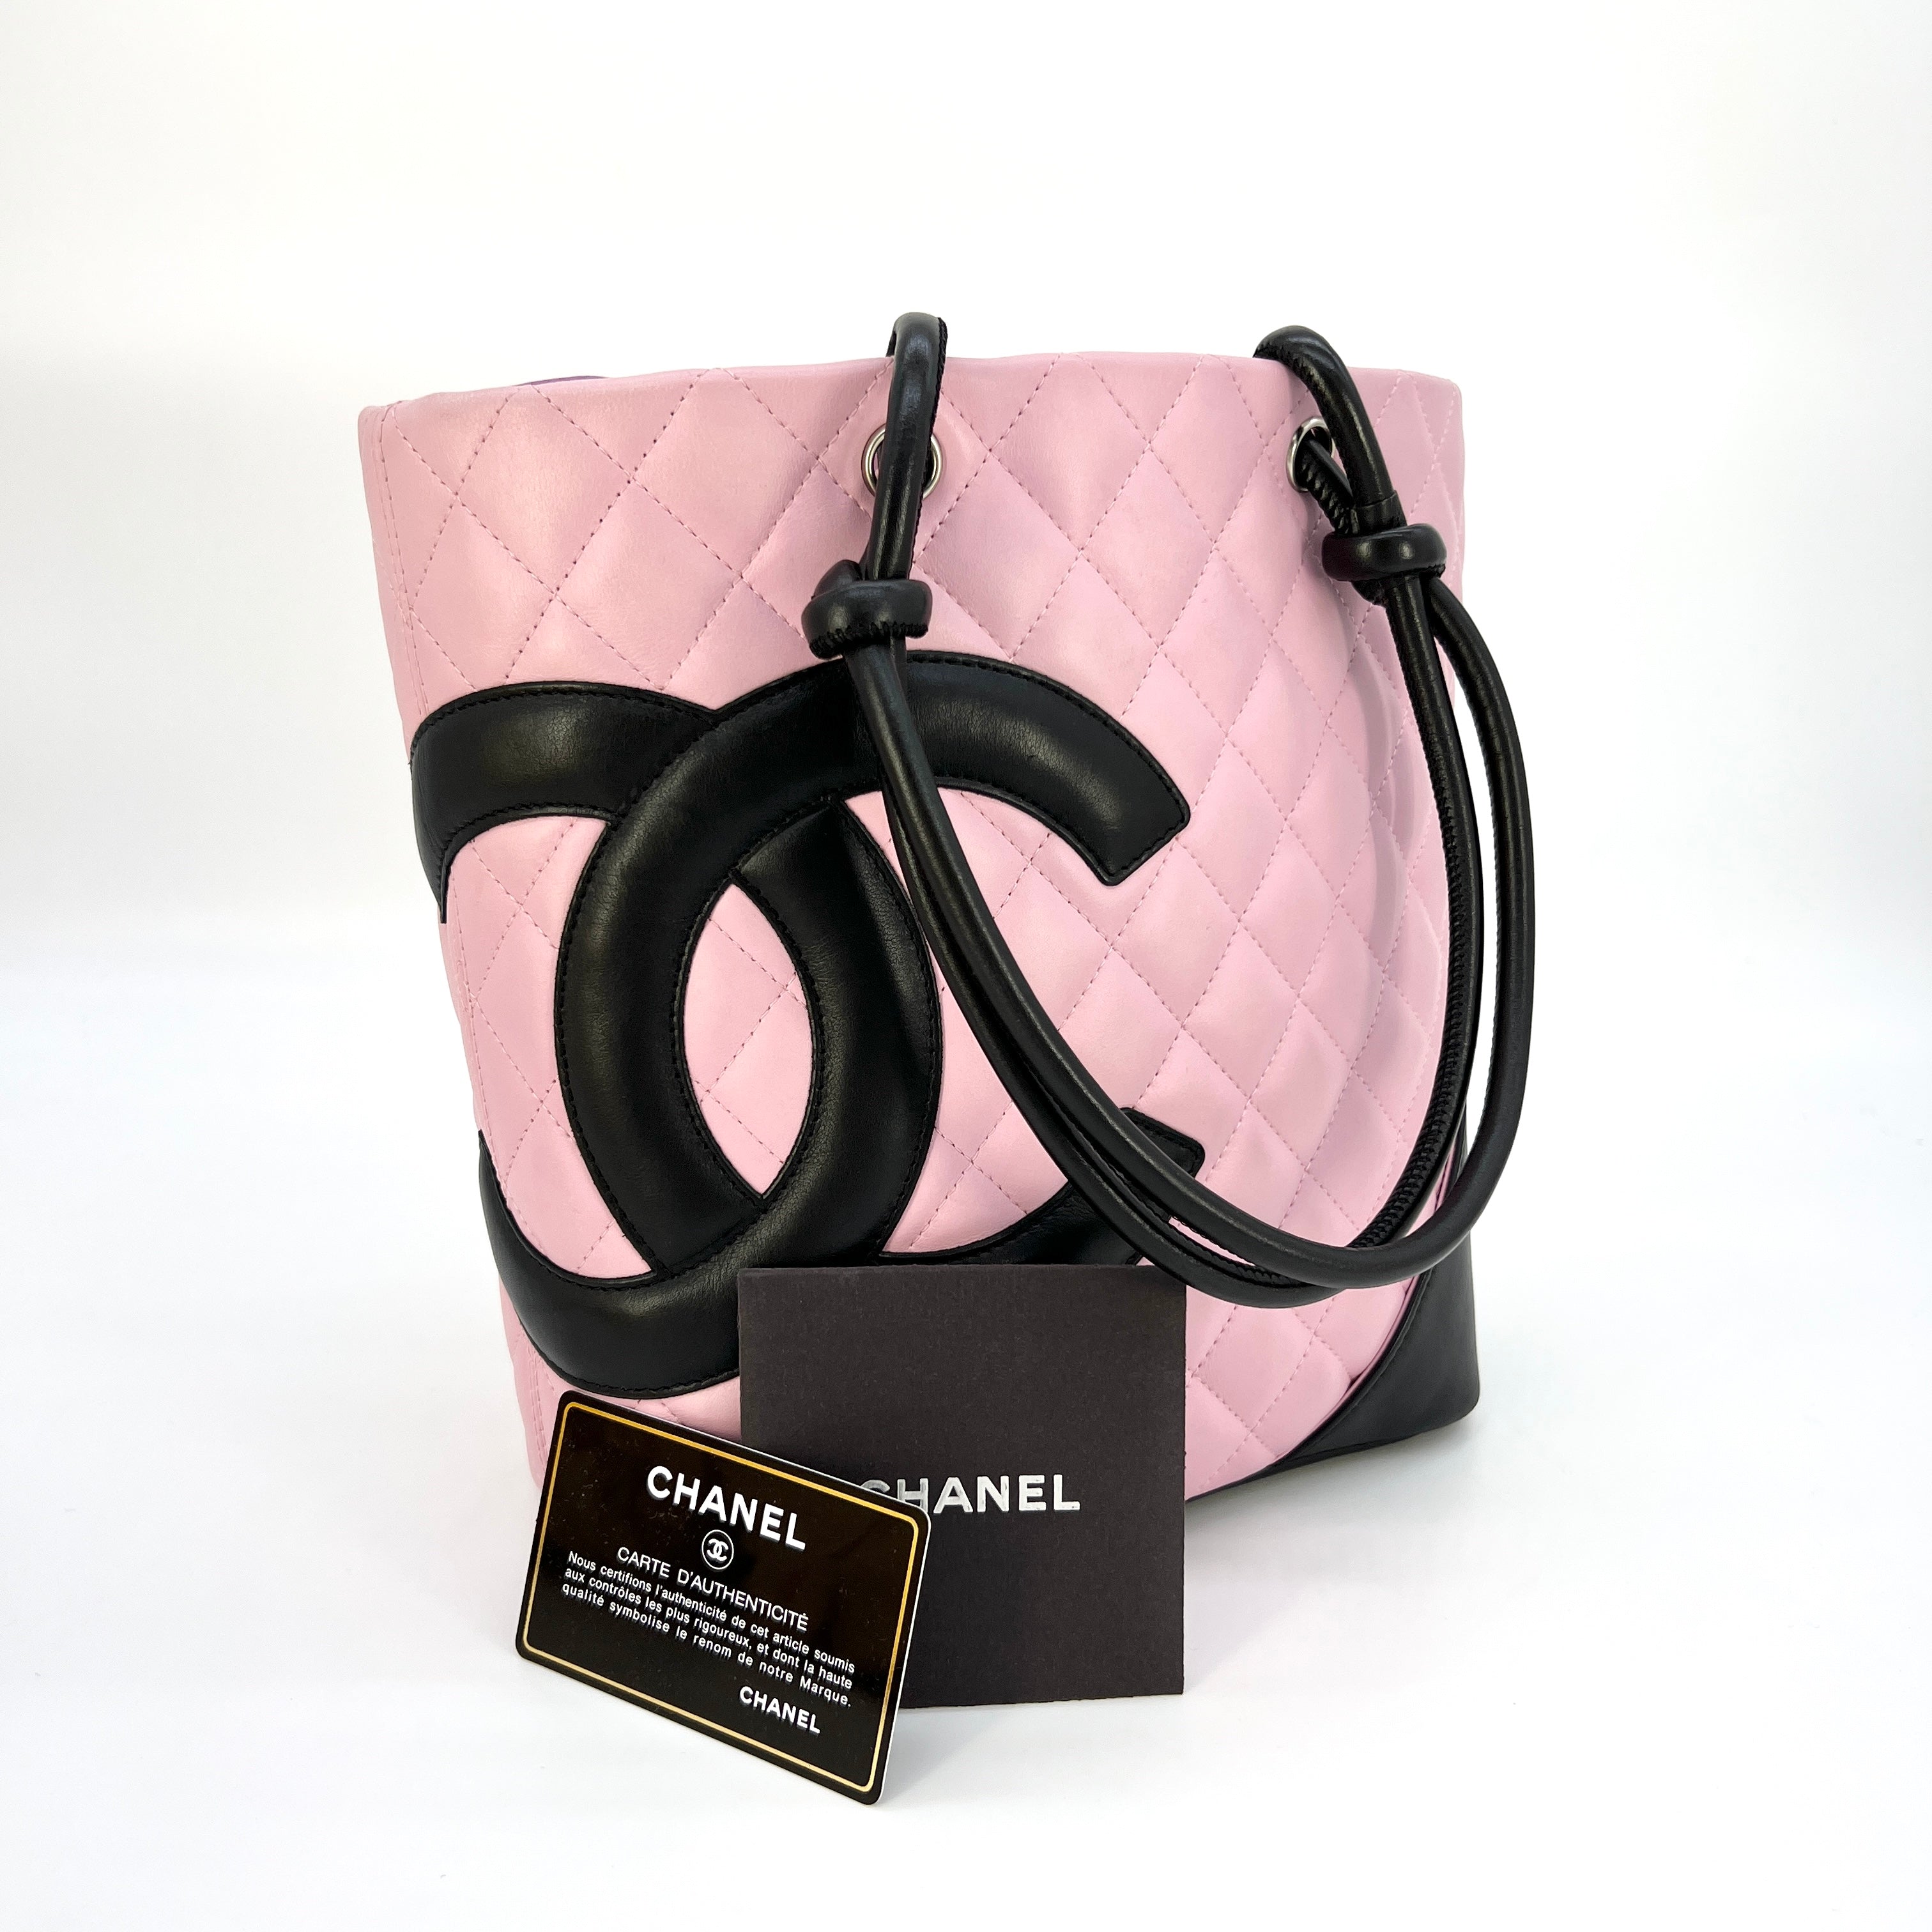 CHANEL, Bags, Authentic Chanel Cambon Large Tote Black And Pink